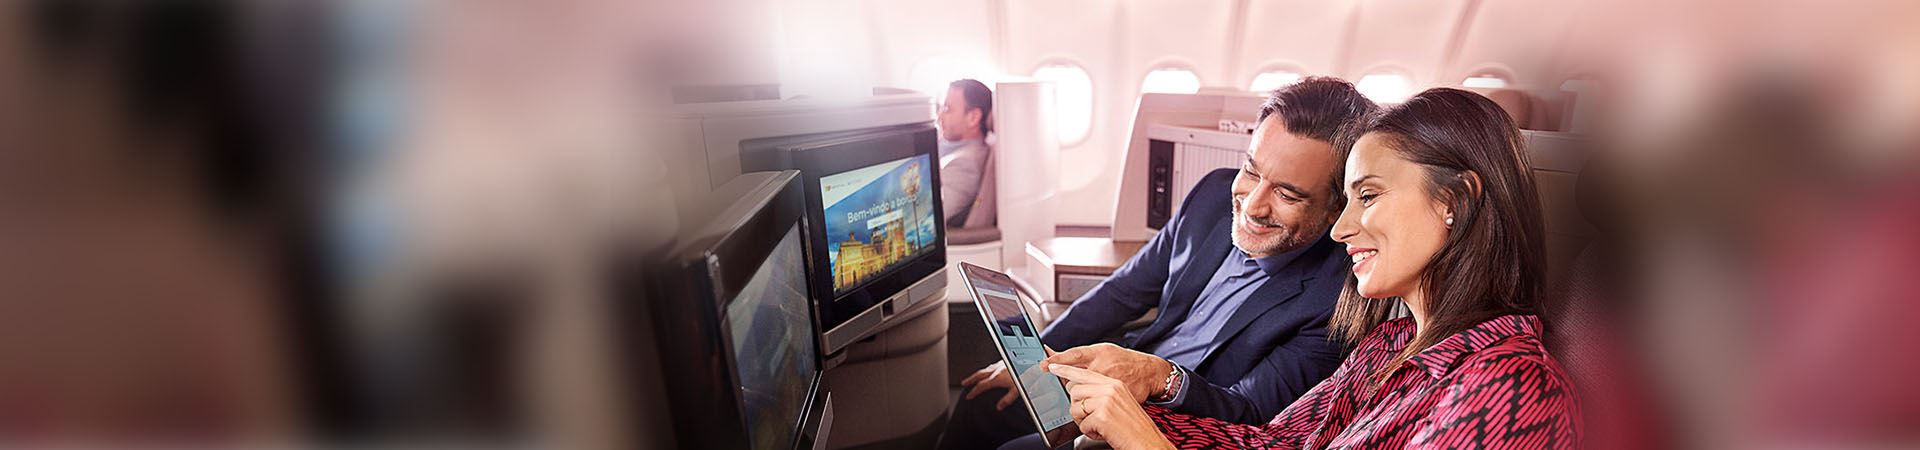 Close up of a smiling woman and a smiling man sitting on an airplane. The woman is holding a tablet, and the man is looking at it. They are both pointing to the tablet screen. There are two screens in front of them, built into the plane's seats.